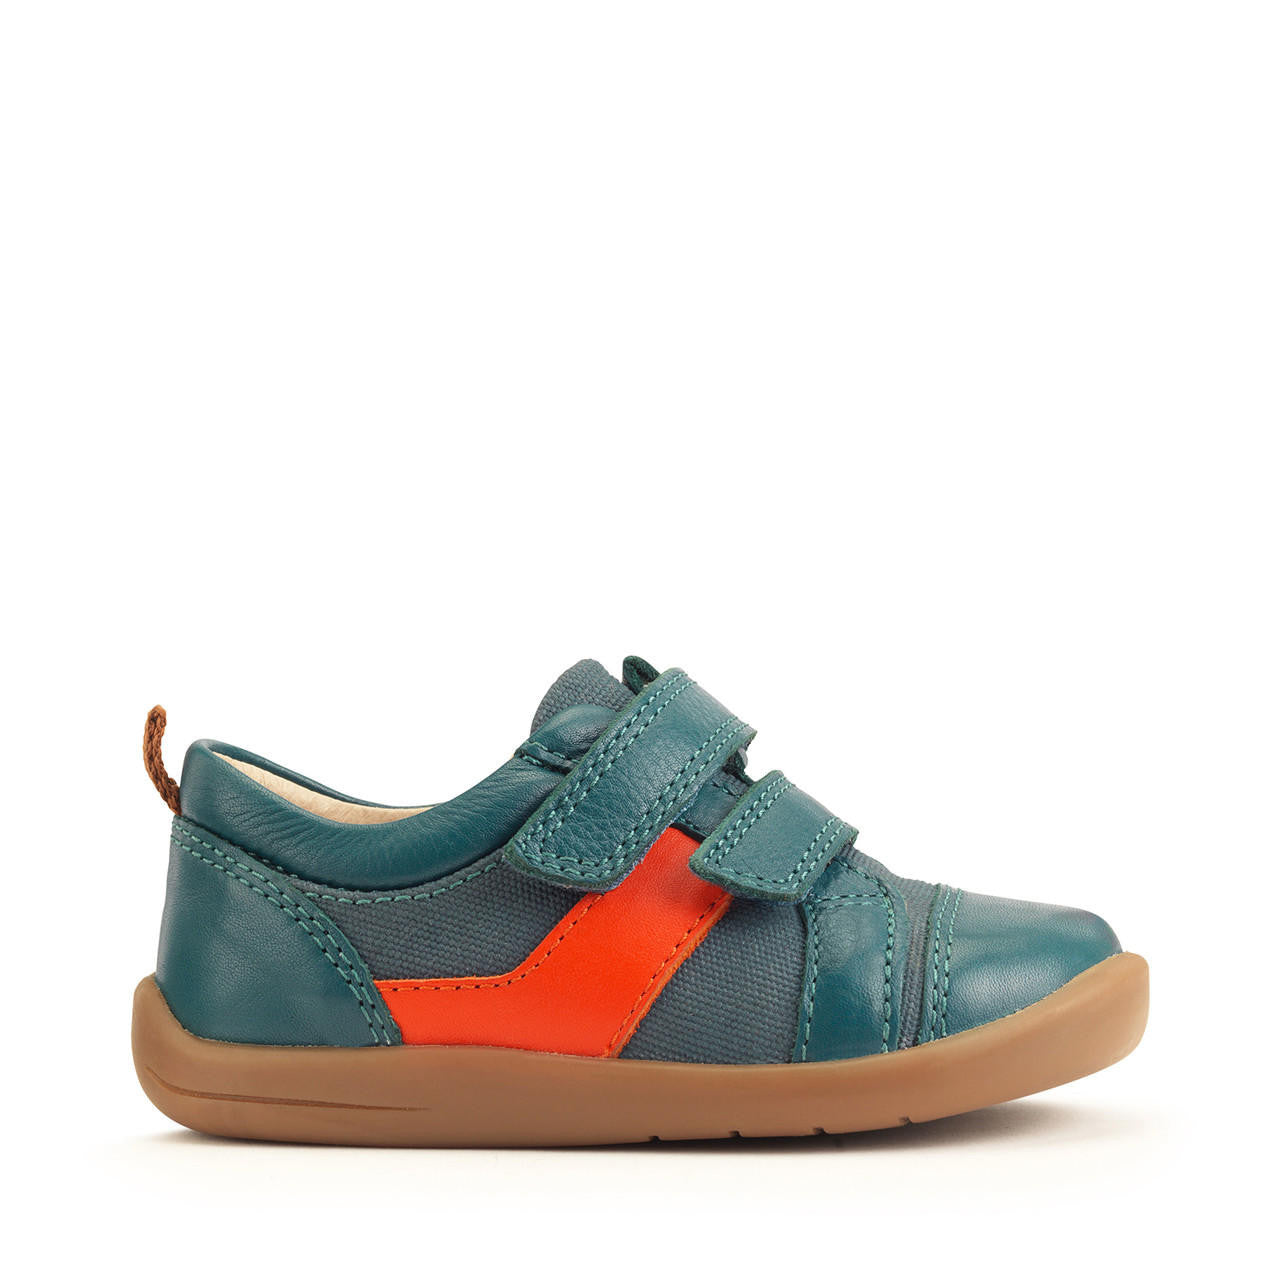 Start-Rite | Maze | Boys Casual Velcro Shoe | Teal Leather/Canvas